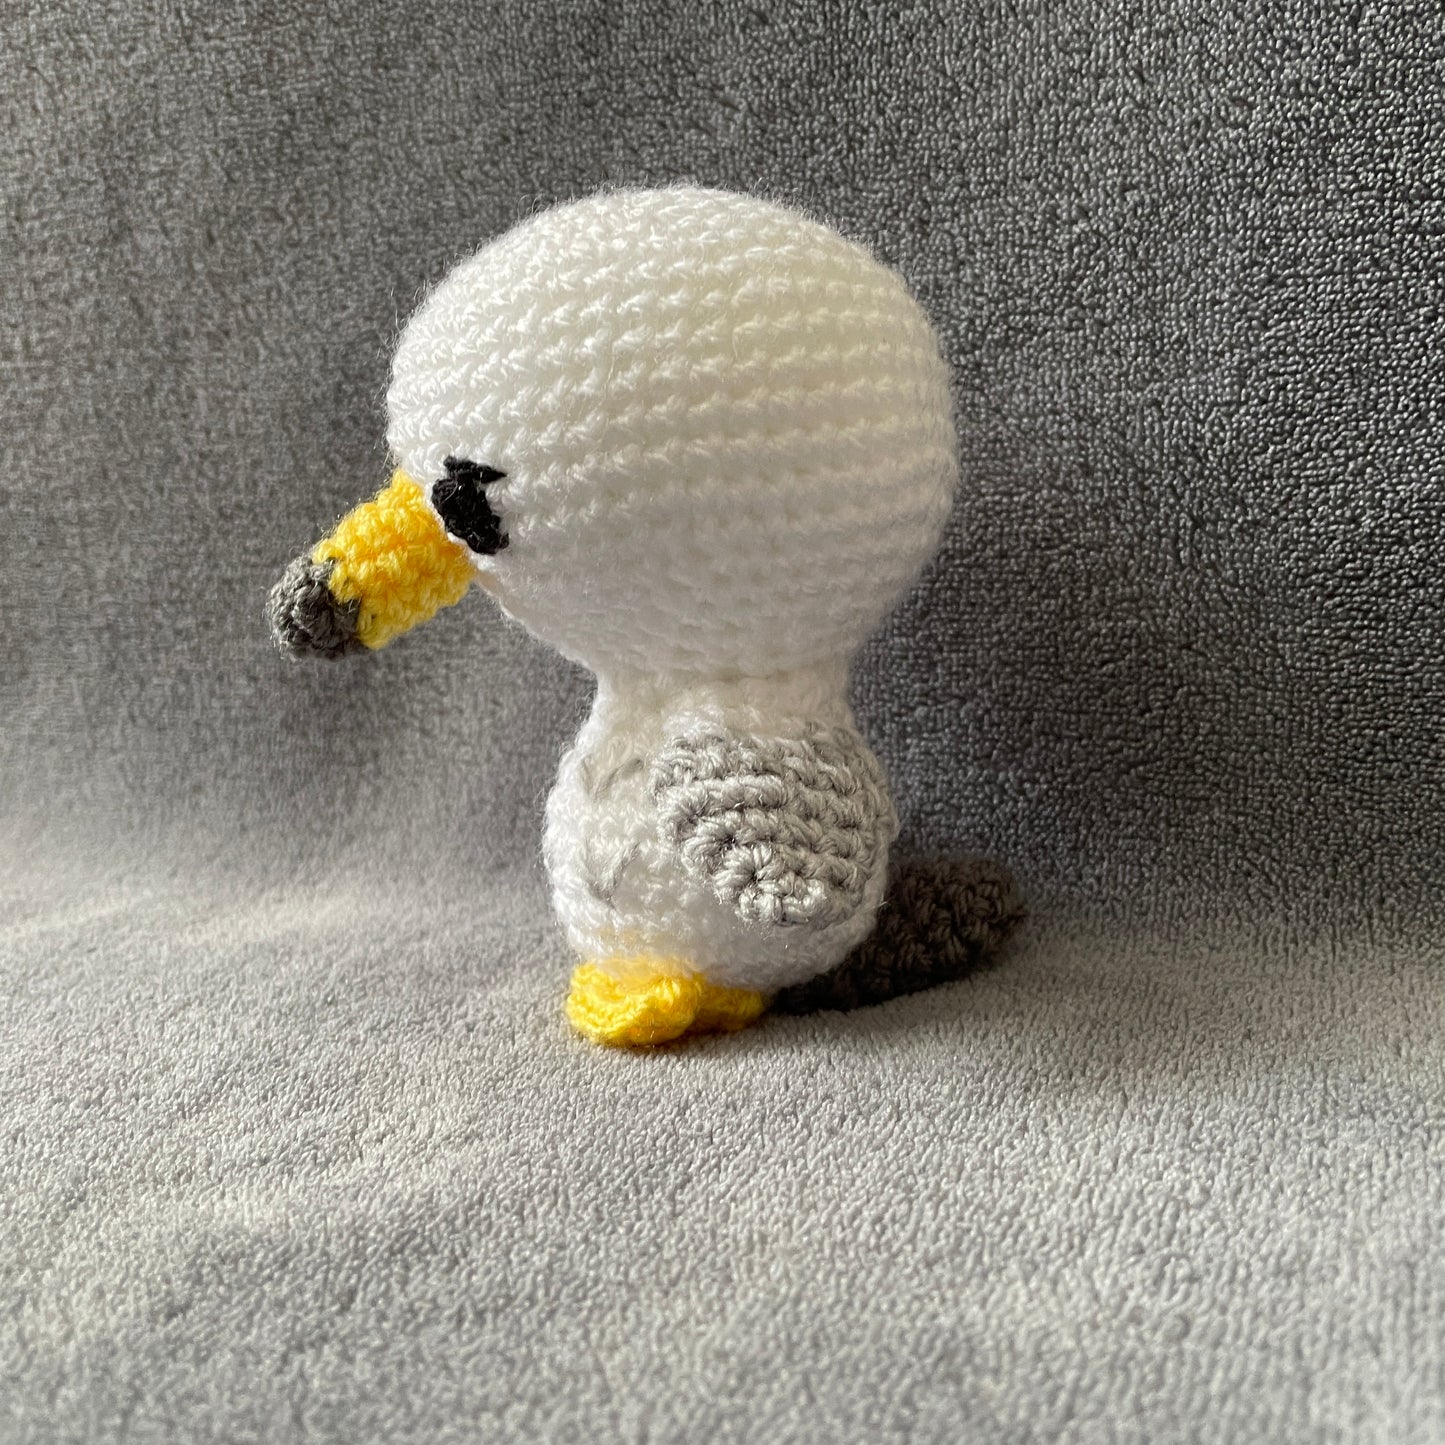 Seb the Seagull Soft Toy